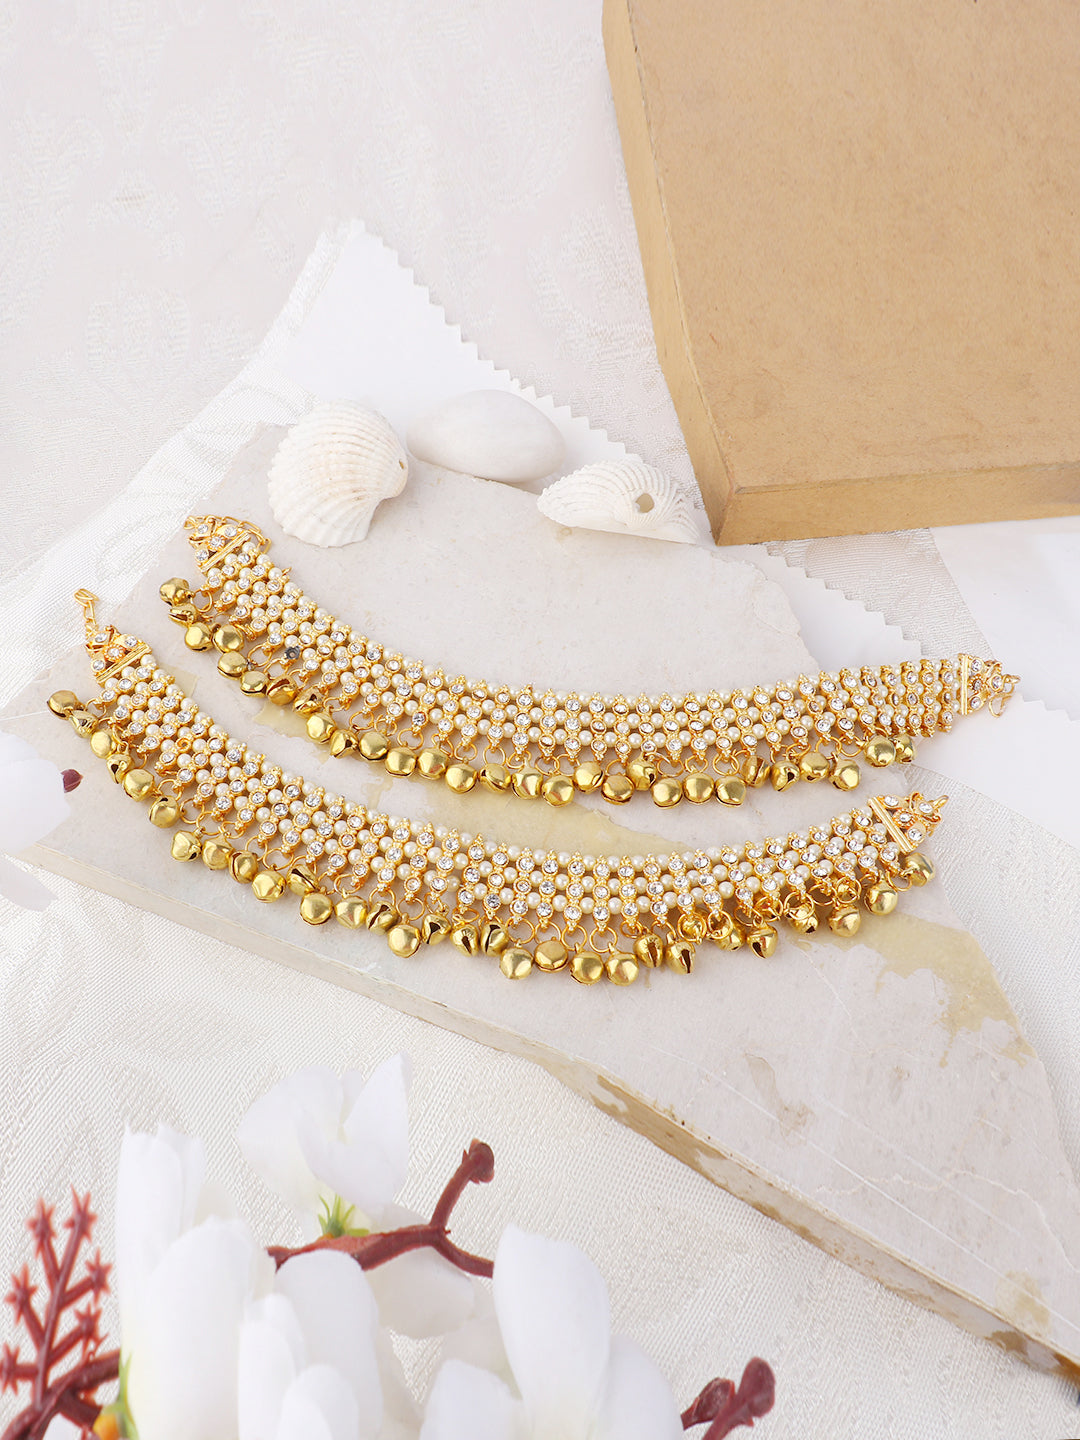 Women's Gold Plated Traditional Ghungroo Anklet/ Payal For Bridals - Anikas Creation